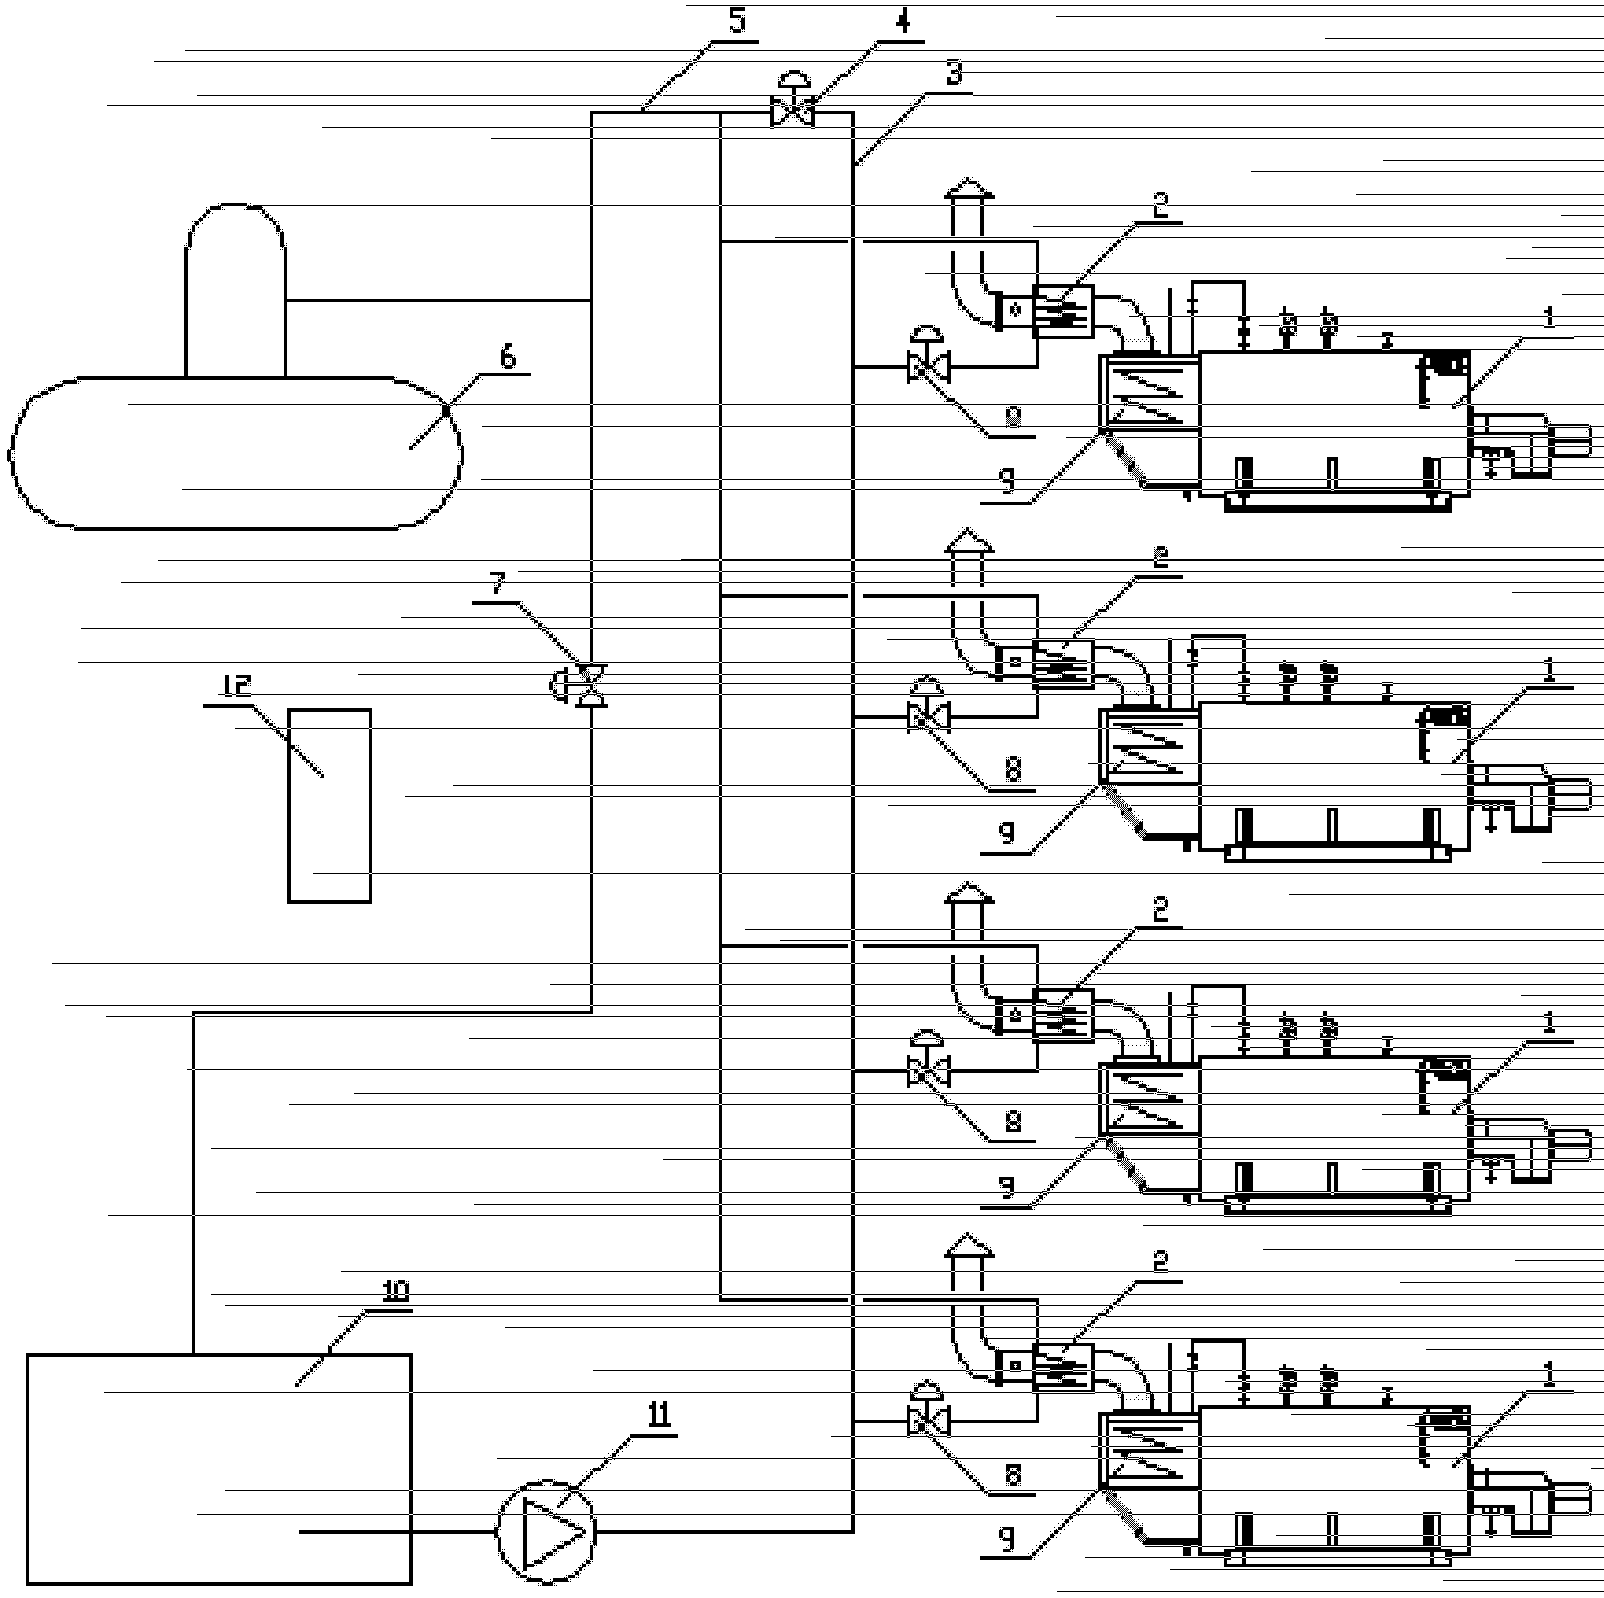 Water feeding system for multiple condensing boilers